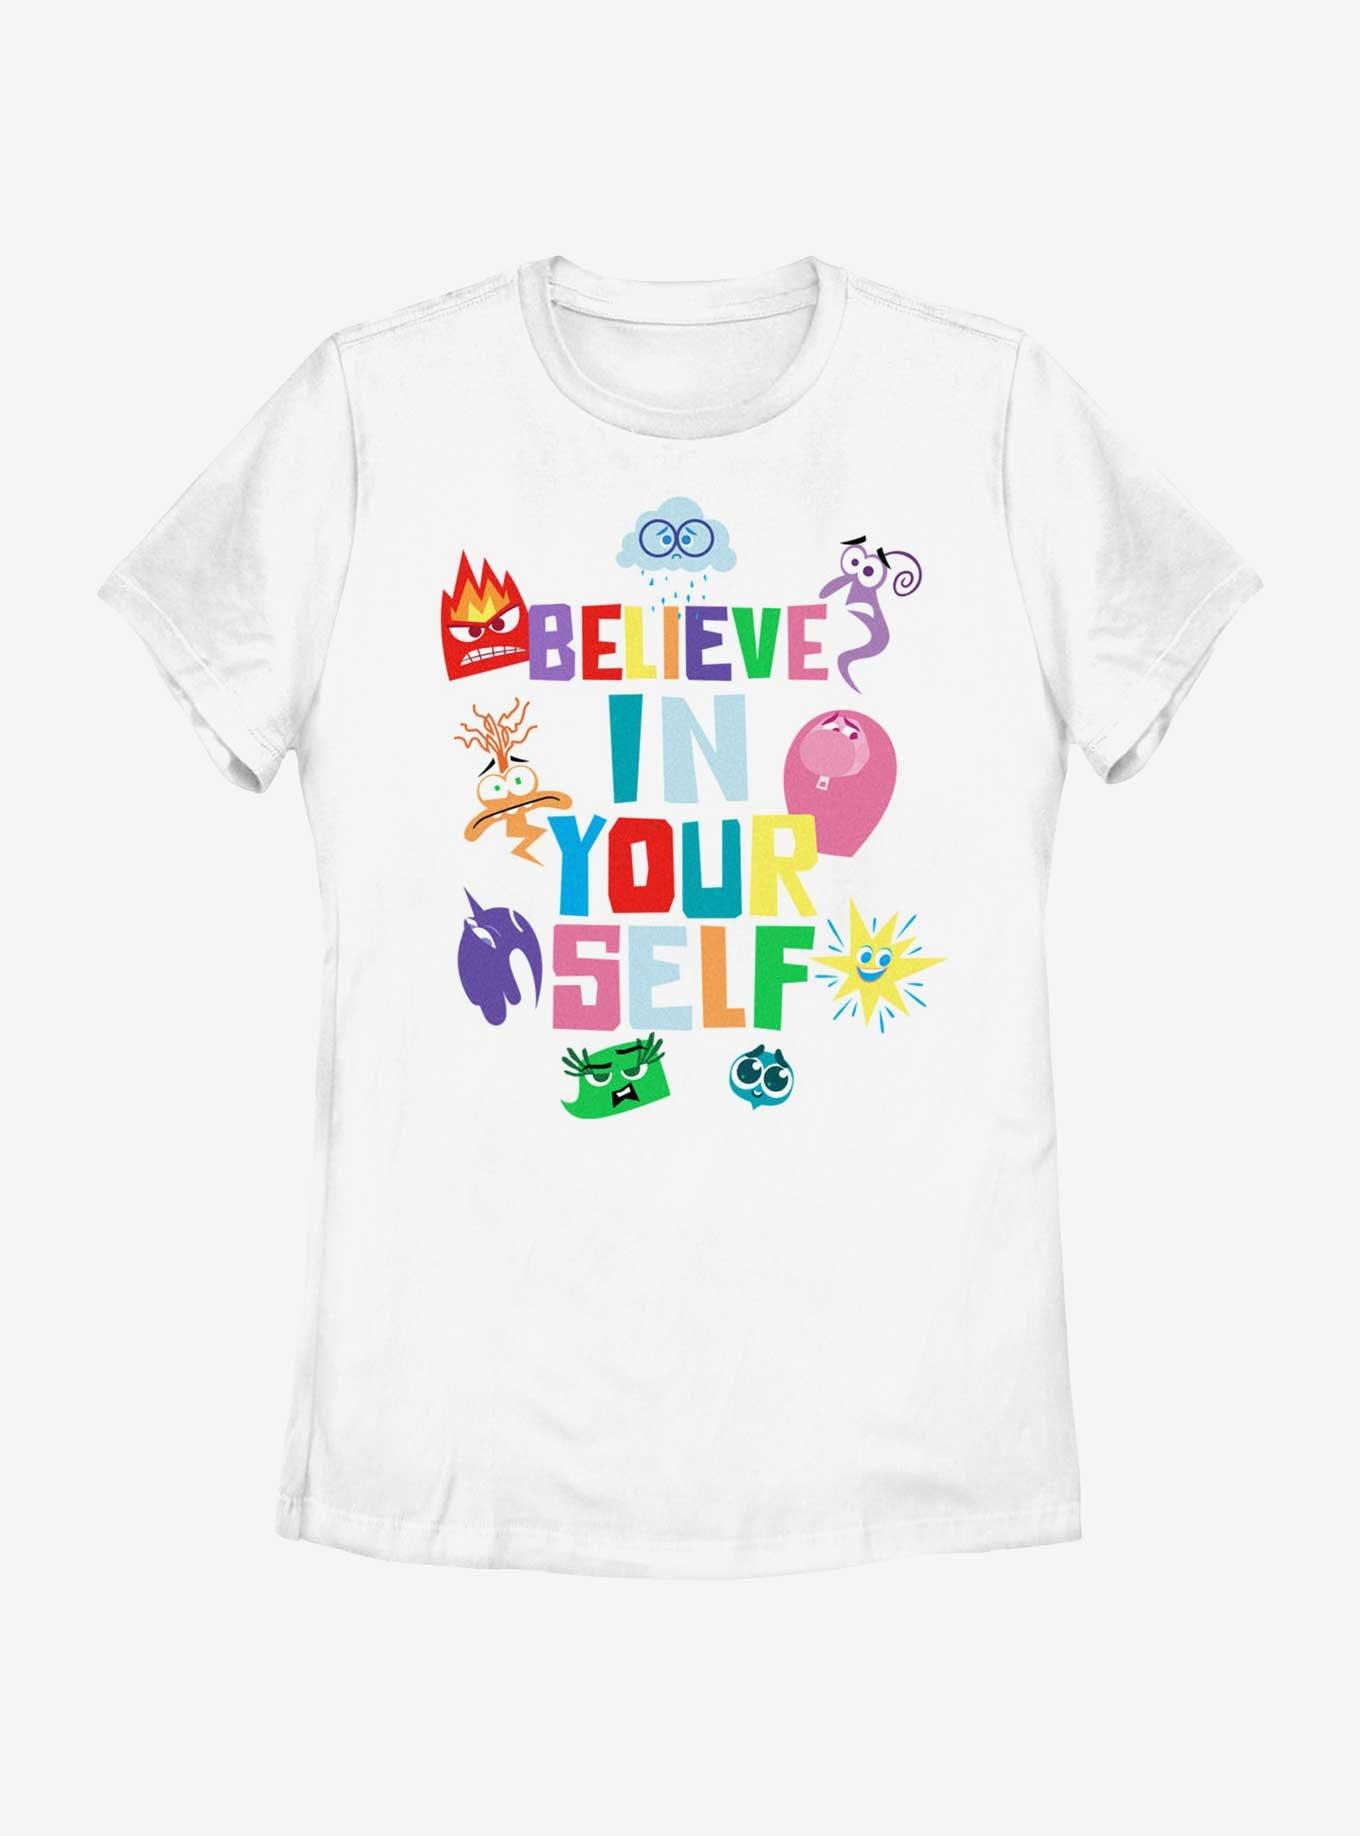 Disney Pixar Inside Out 2 Believe In Your Self Womens T-Shirt, WHITE, hi-res